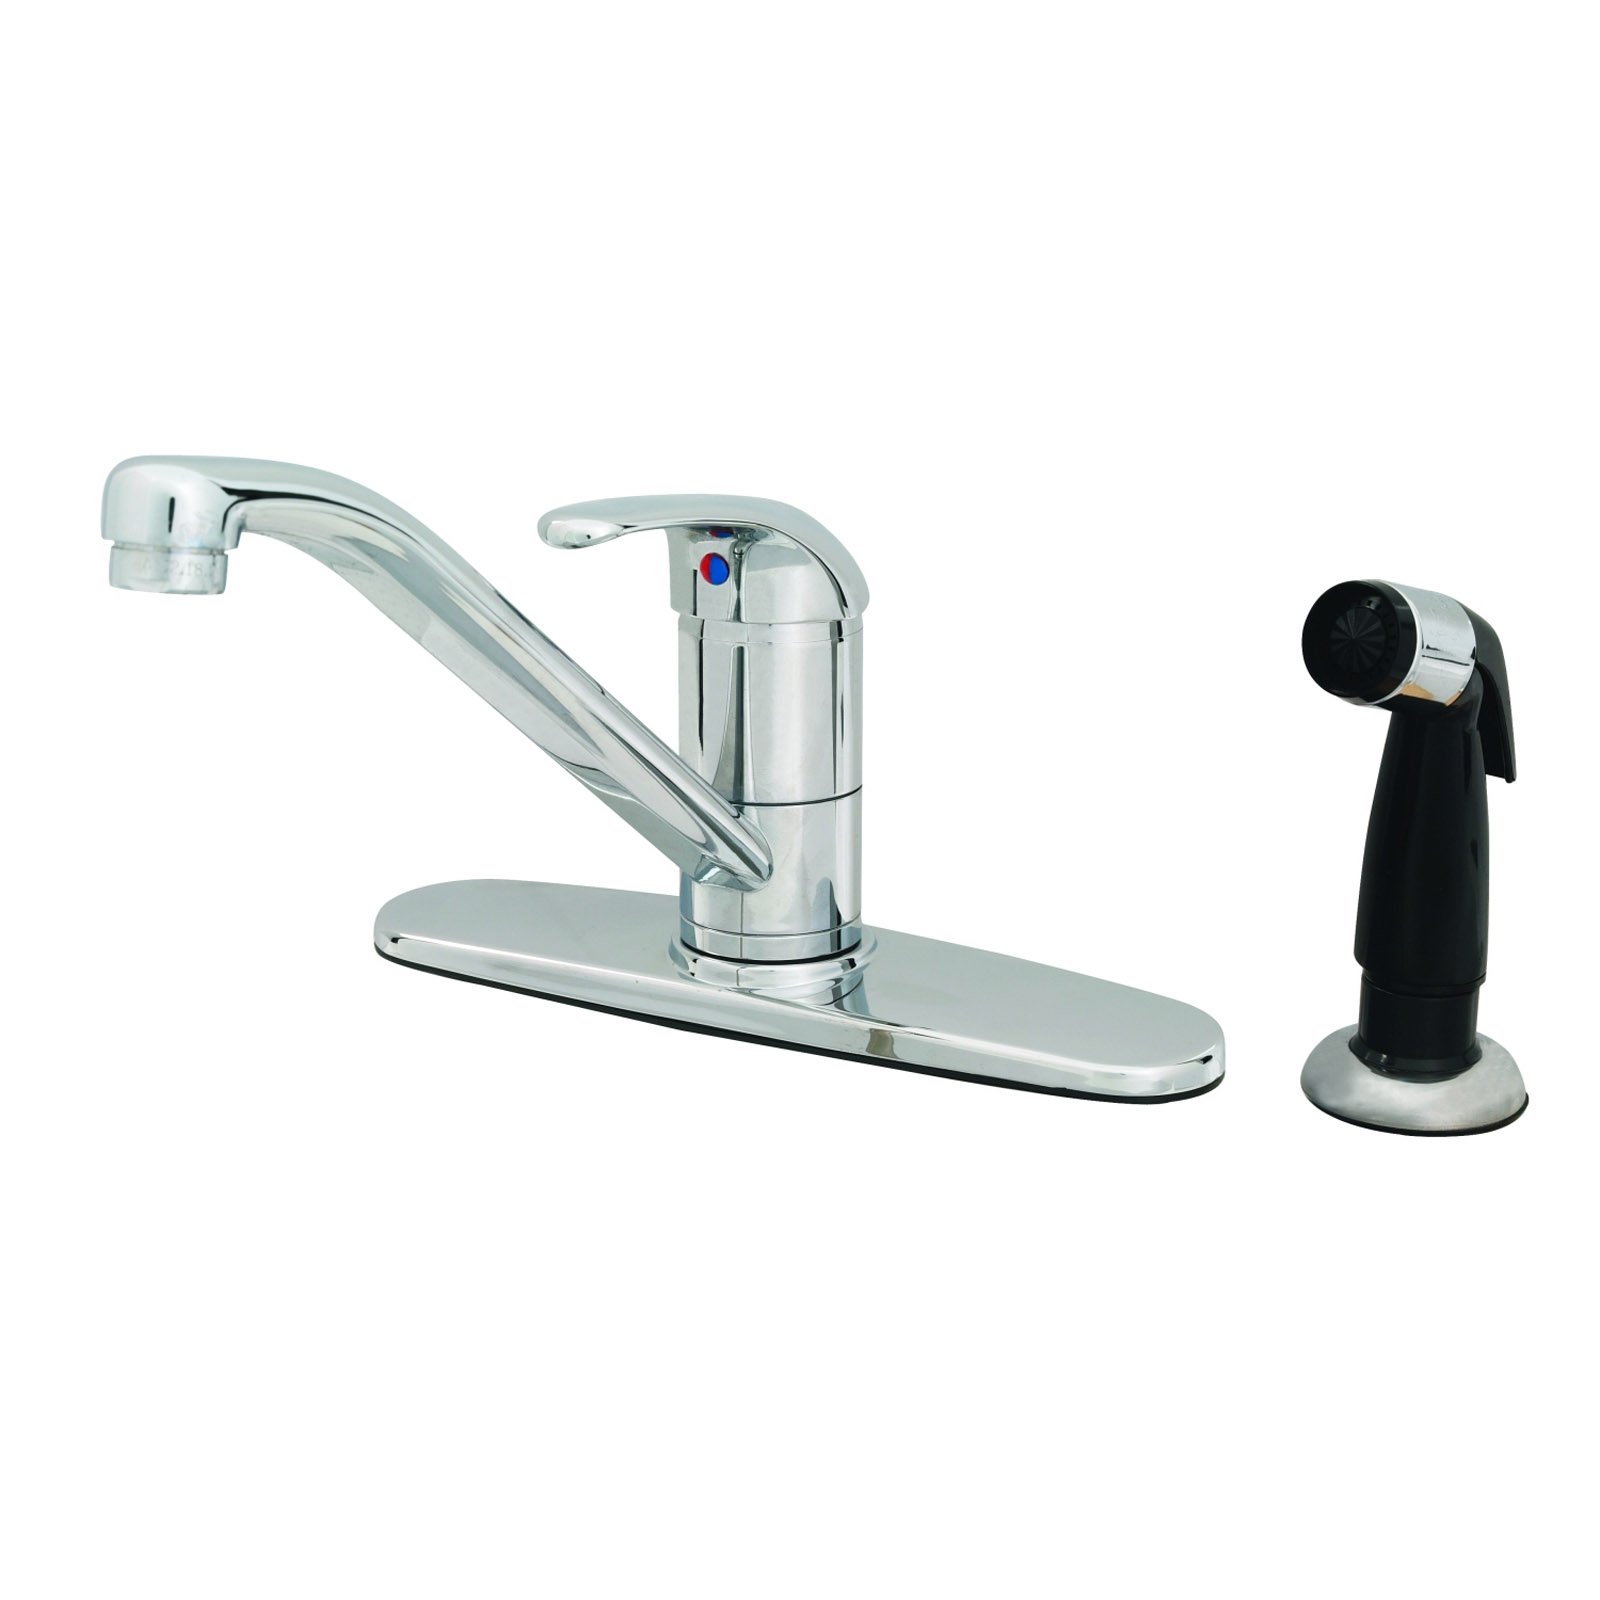 T&S Brass B-2730-WS Single Lever Faucet